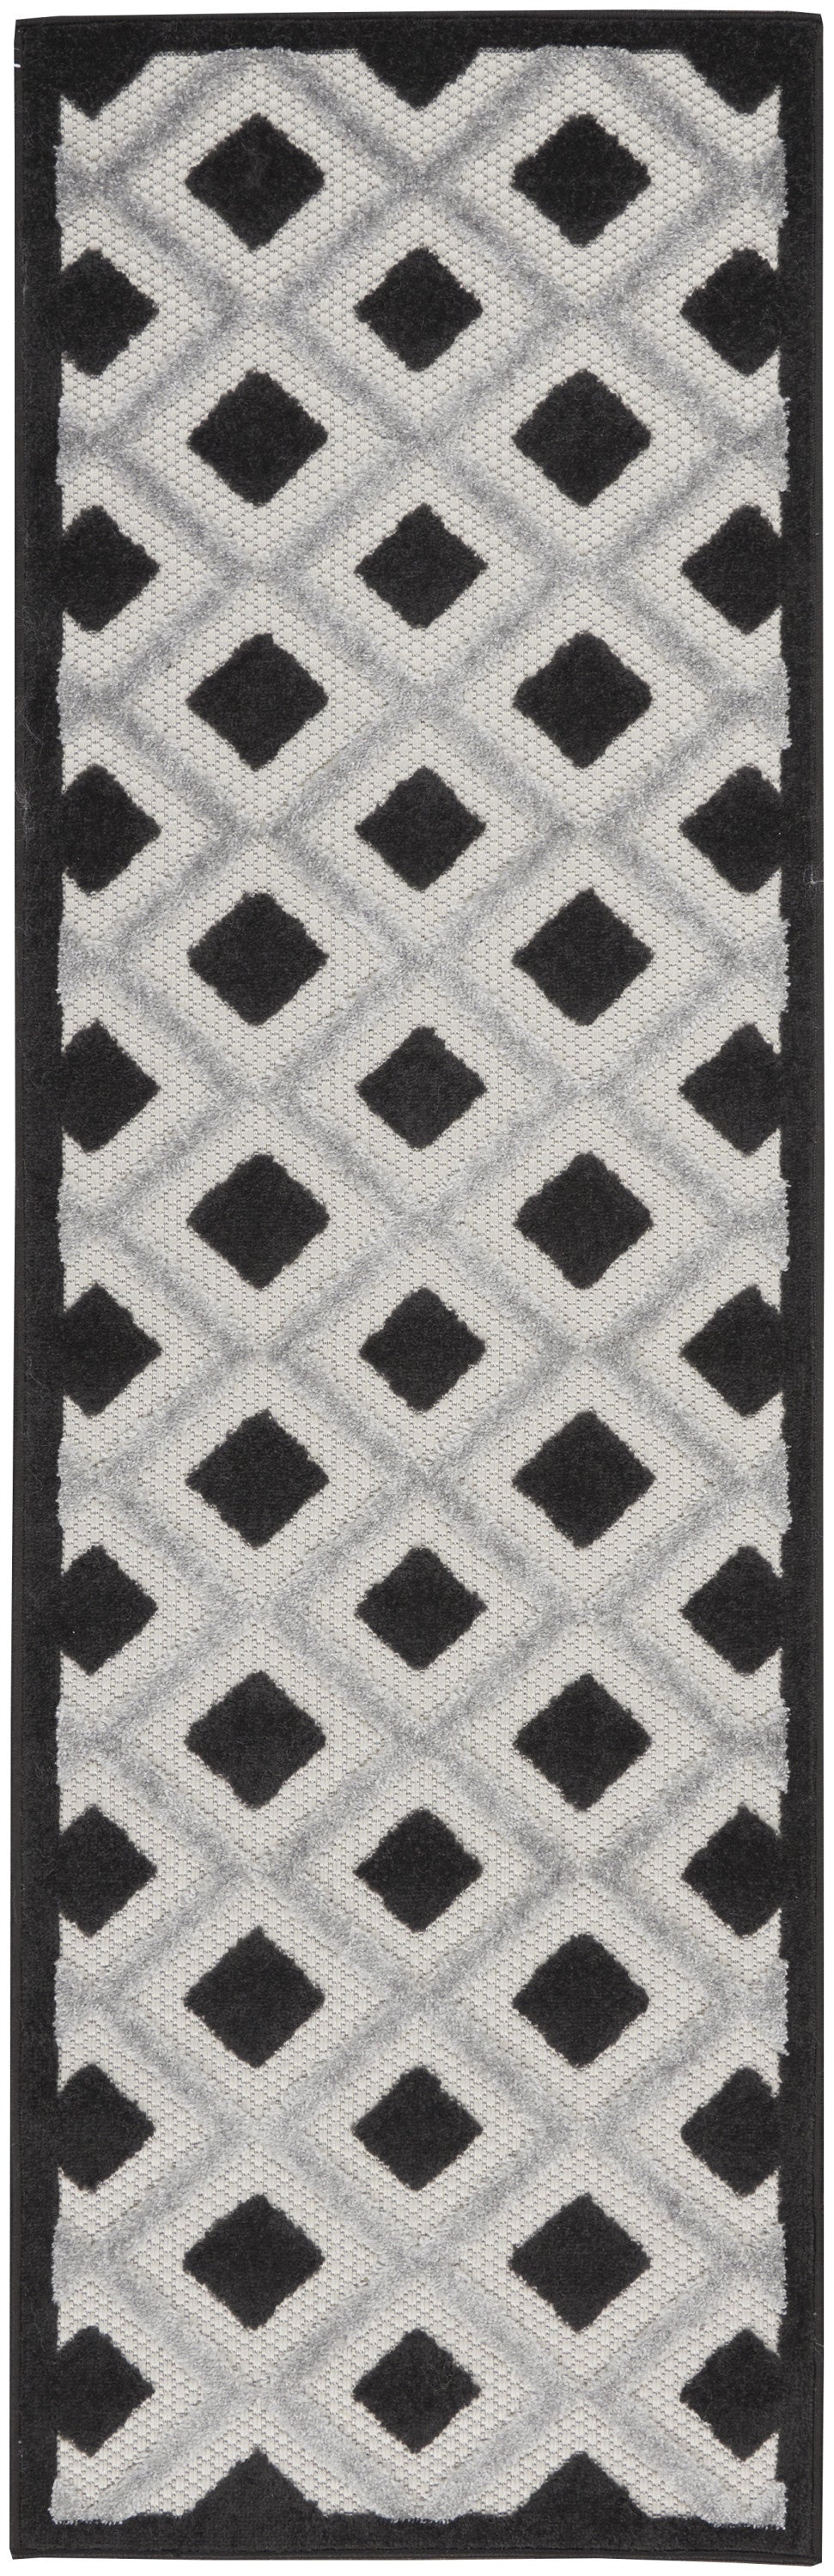 2' X 6' Black And White Gingham Non Skid Indoor Outdoor Runner Rug